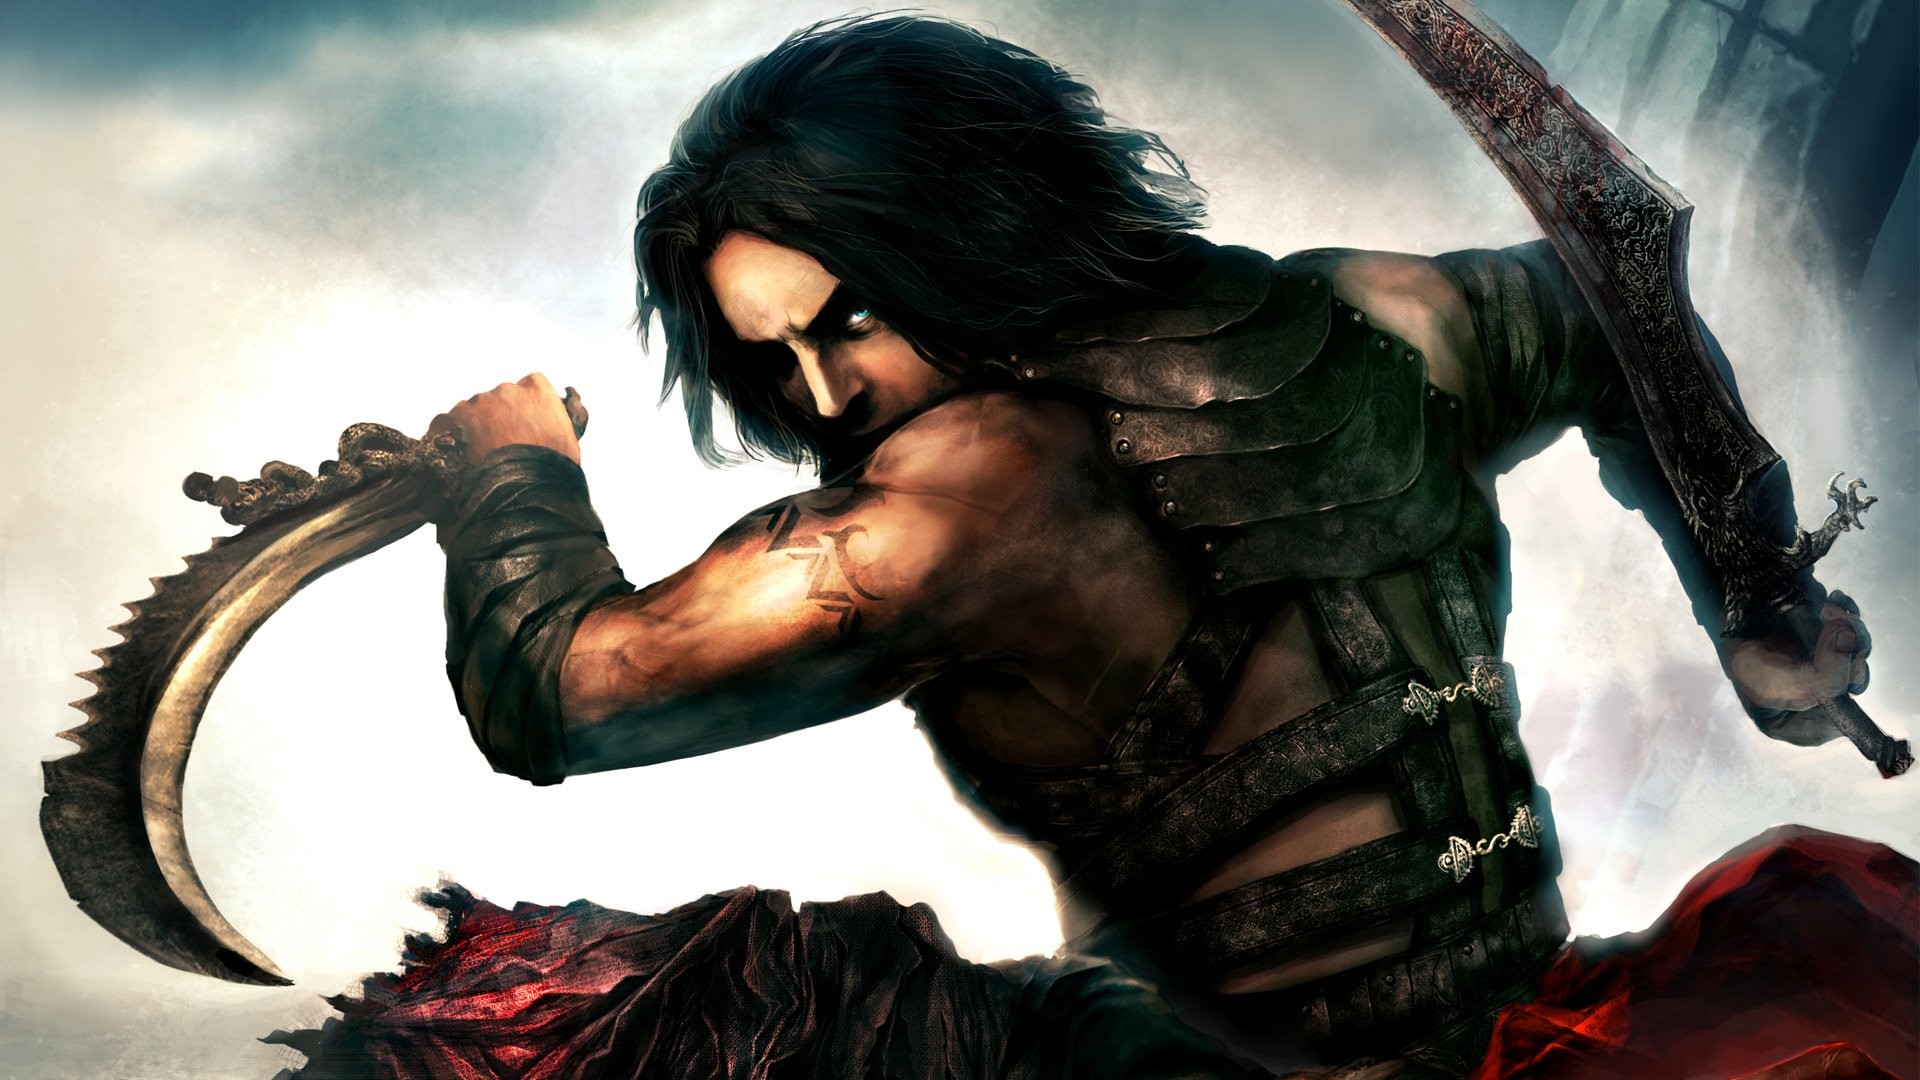 1920x1080 Video Game - Prince Of Persia: Warrior Within Wallpaper